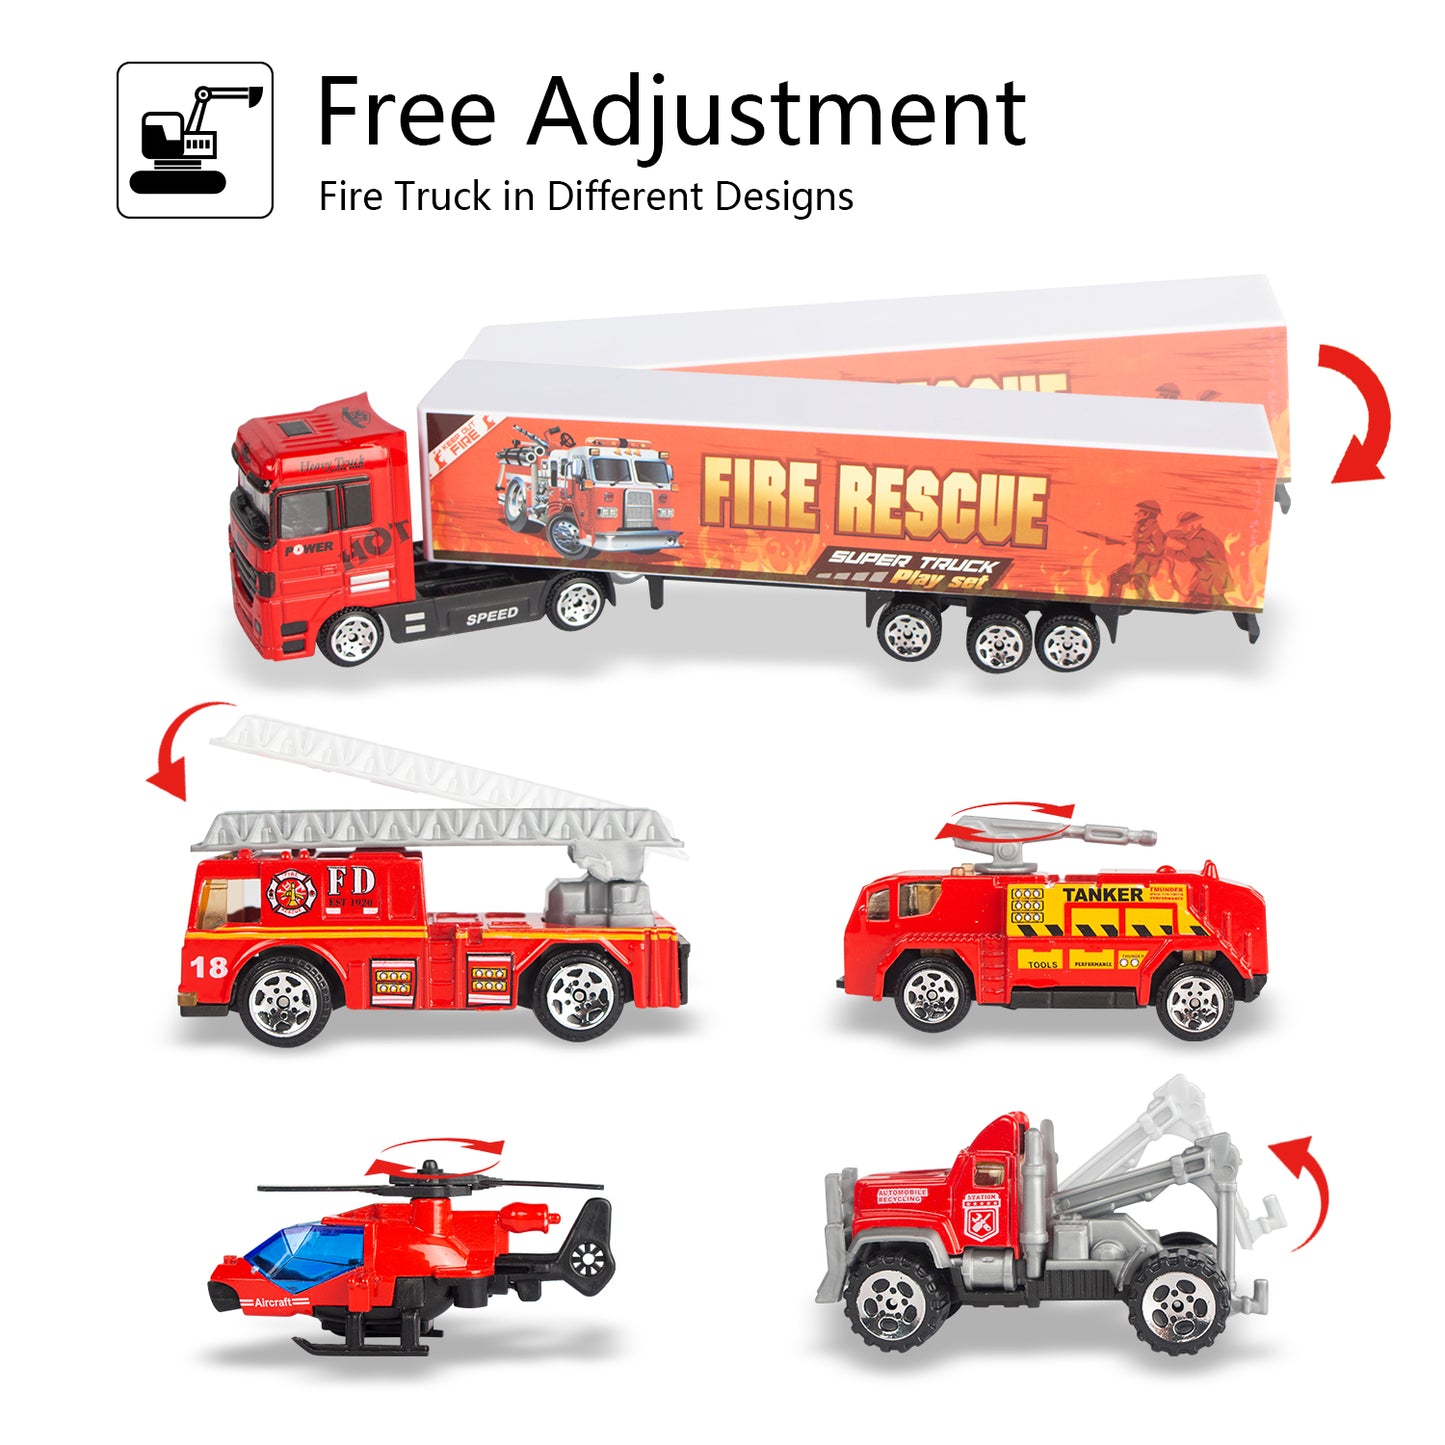 Joyfia 10 in 1 Fire Truck Toys, Mini Die-cast Fire Engine Car Toy Set in Carrier Truck, Rescue Emergency Double Side Transport Vehicle for 3 Years Old Boys and Girls